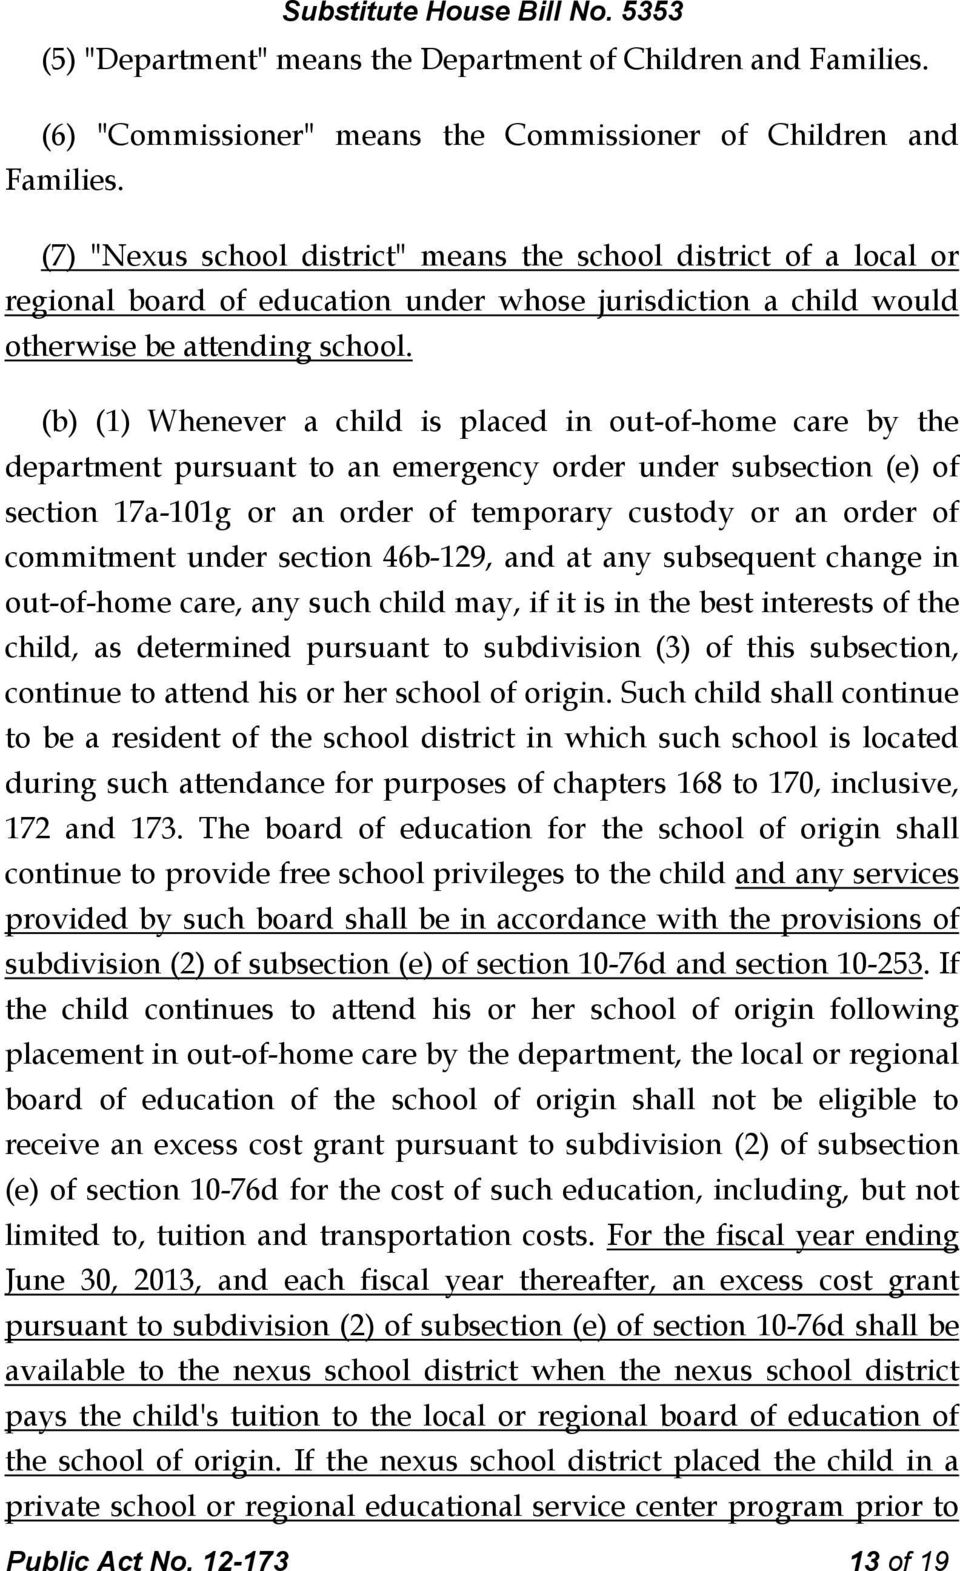 (b) (1) Whenever a child is placed in out-of-home care by the department pursuant to an emergency order under subsection (e) of section 17a-101g or an order of temporary custody or an order of